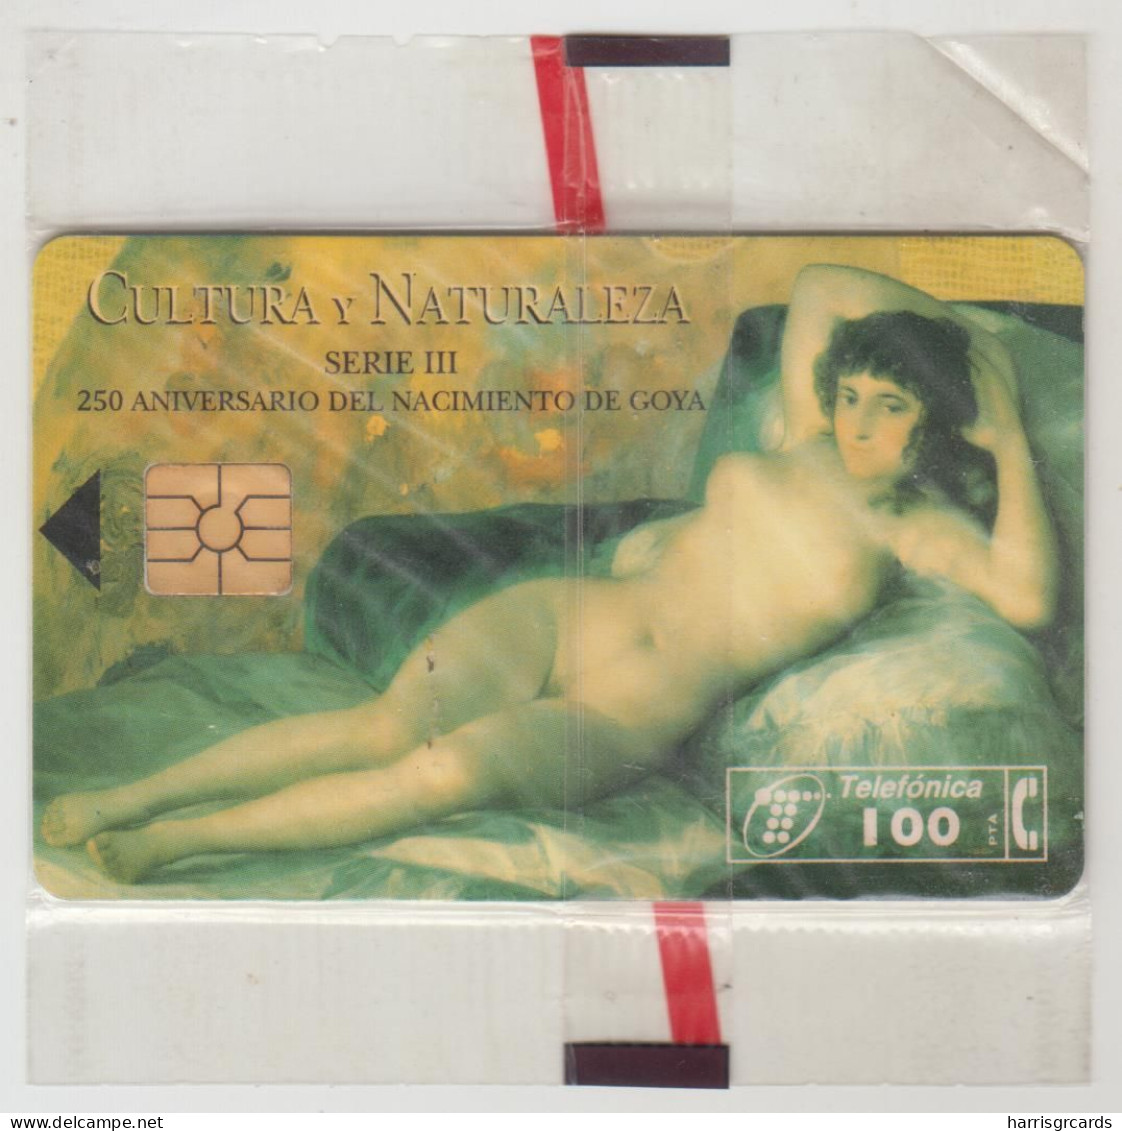 SPAIN - FNMT Cultura Y Naturaleza (Painting Nude Woman), P-200, 05/96, Tirage 9.100, Mint - Emissioni Private